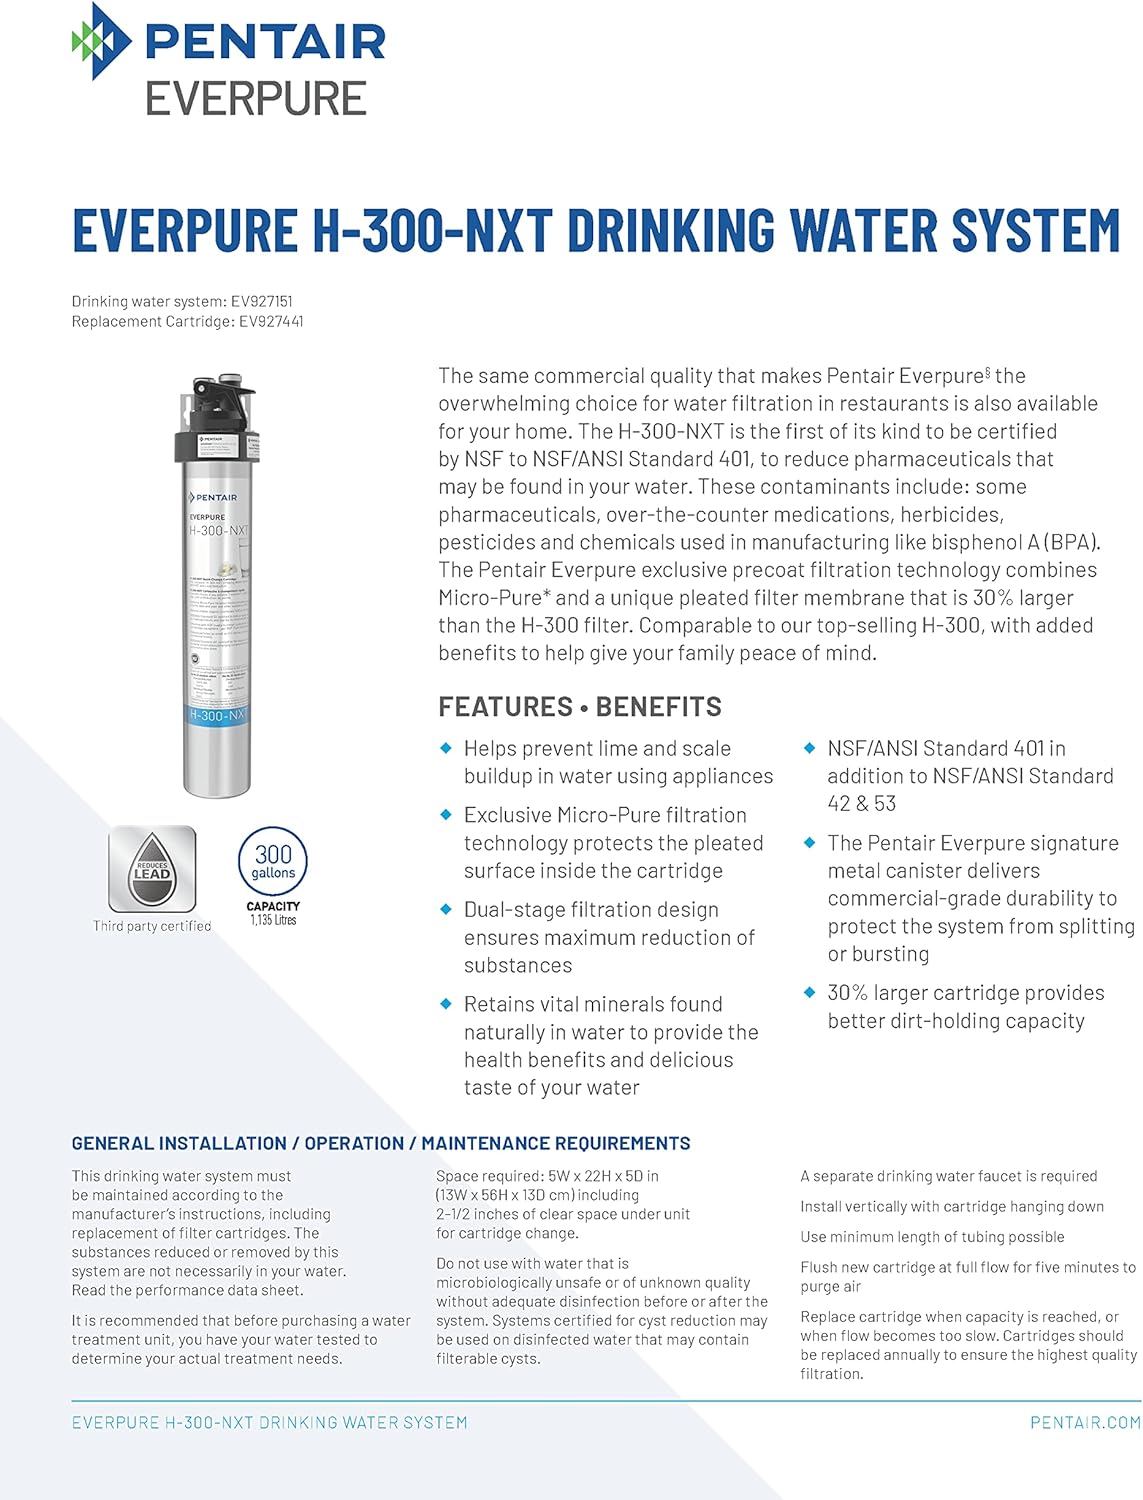 Pentair Everpure Quick-Change Filter Cartridge For Use in Everpure Drinking Water Systems